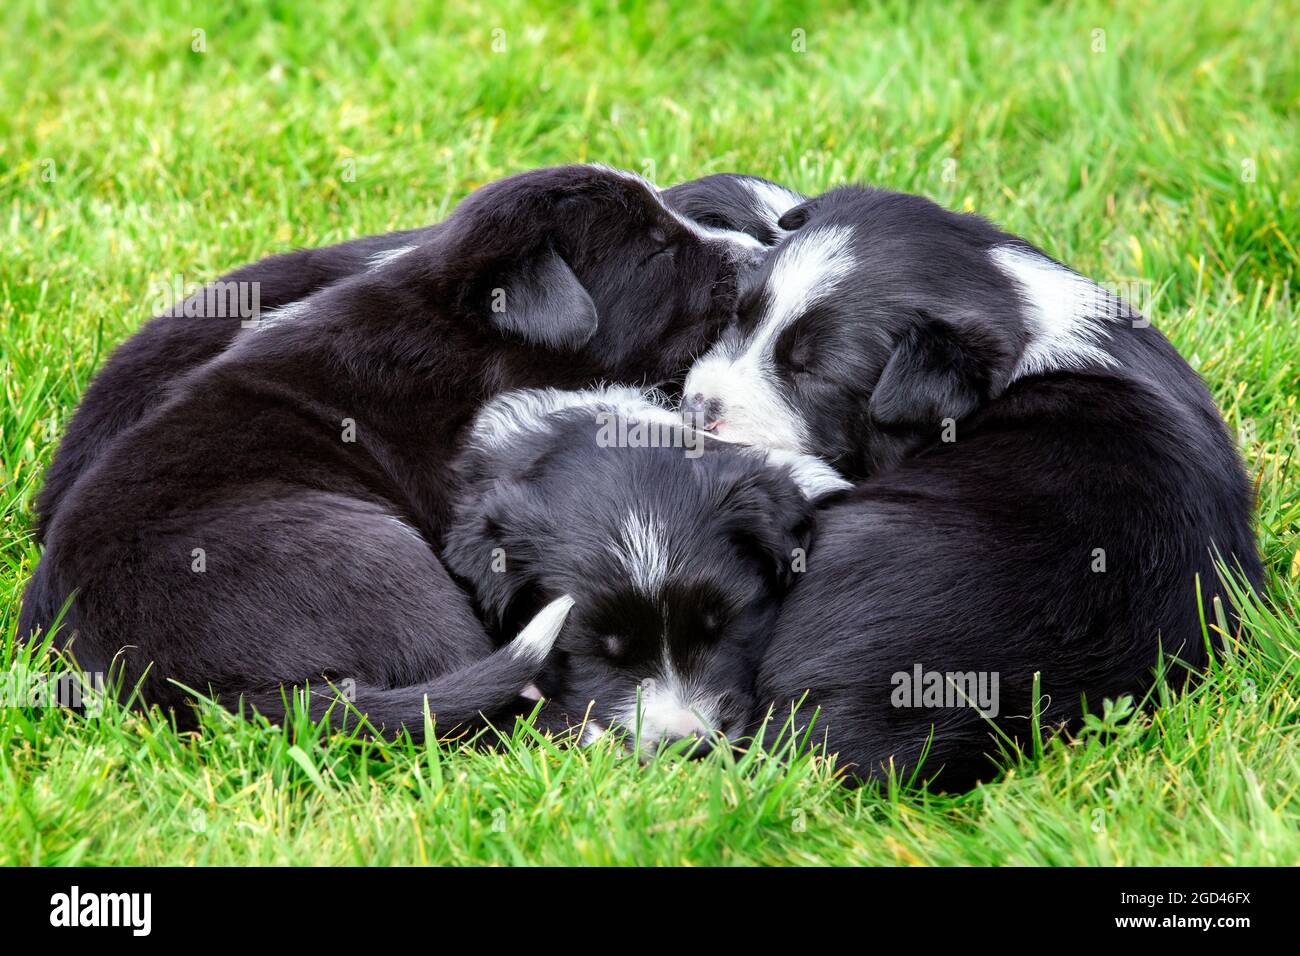 Adorable border collie puppies lying in a puppy pile outside on grass Stock  Photo - Alamy